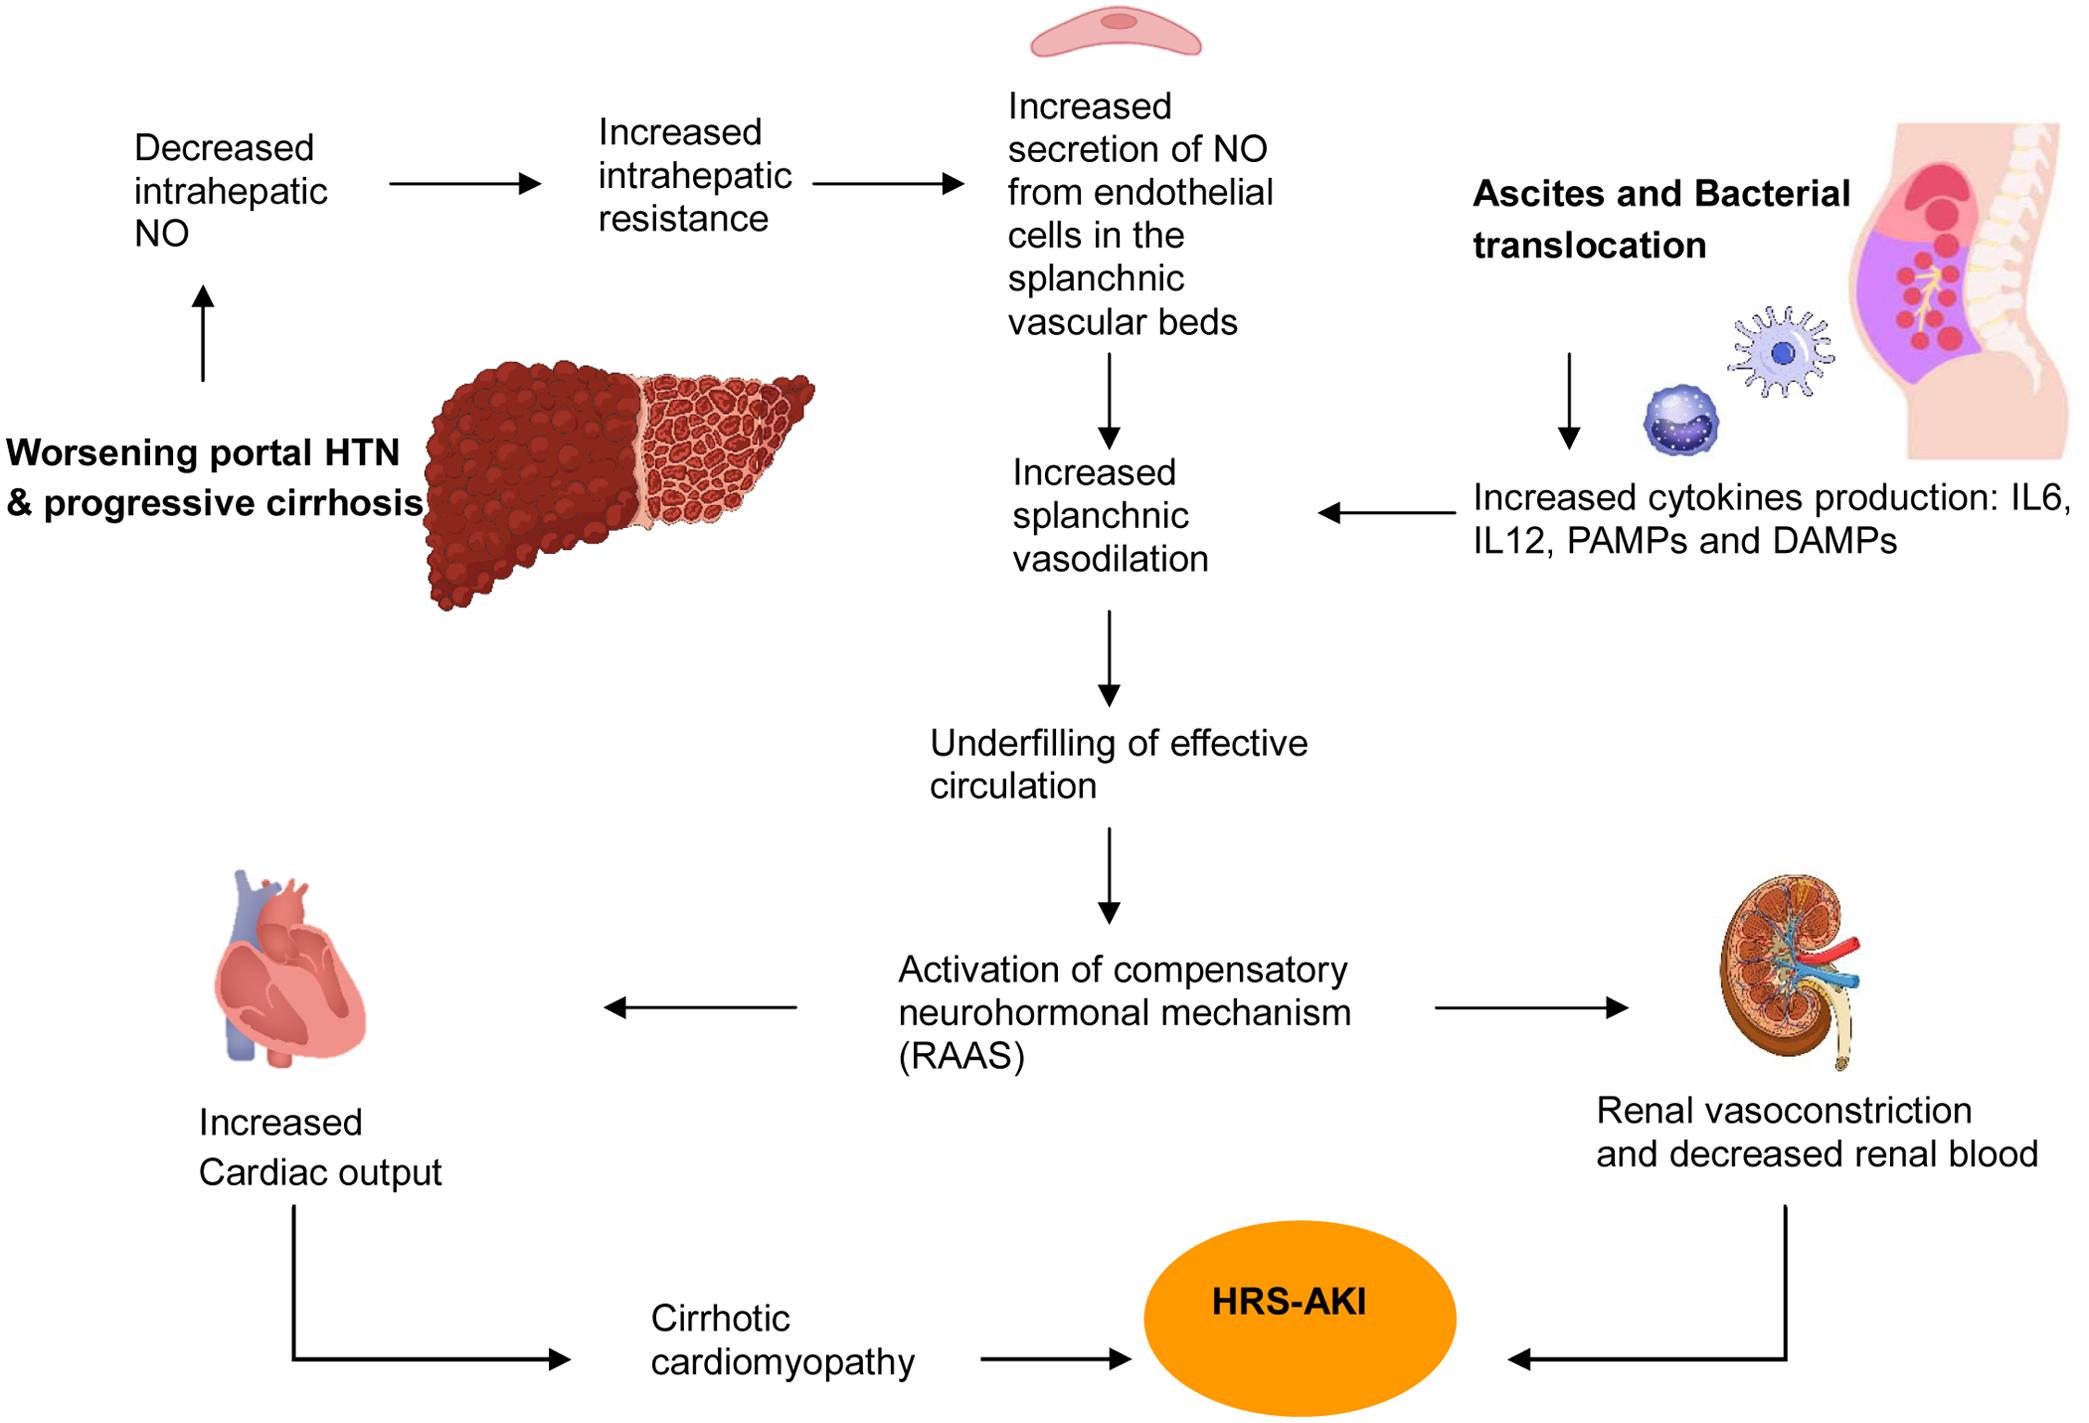 Pathophysiology of the hepatorenal syndrome acute kidney injury (HRS-AKI).